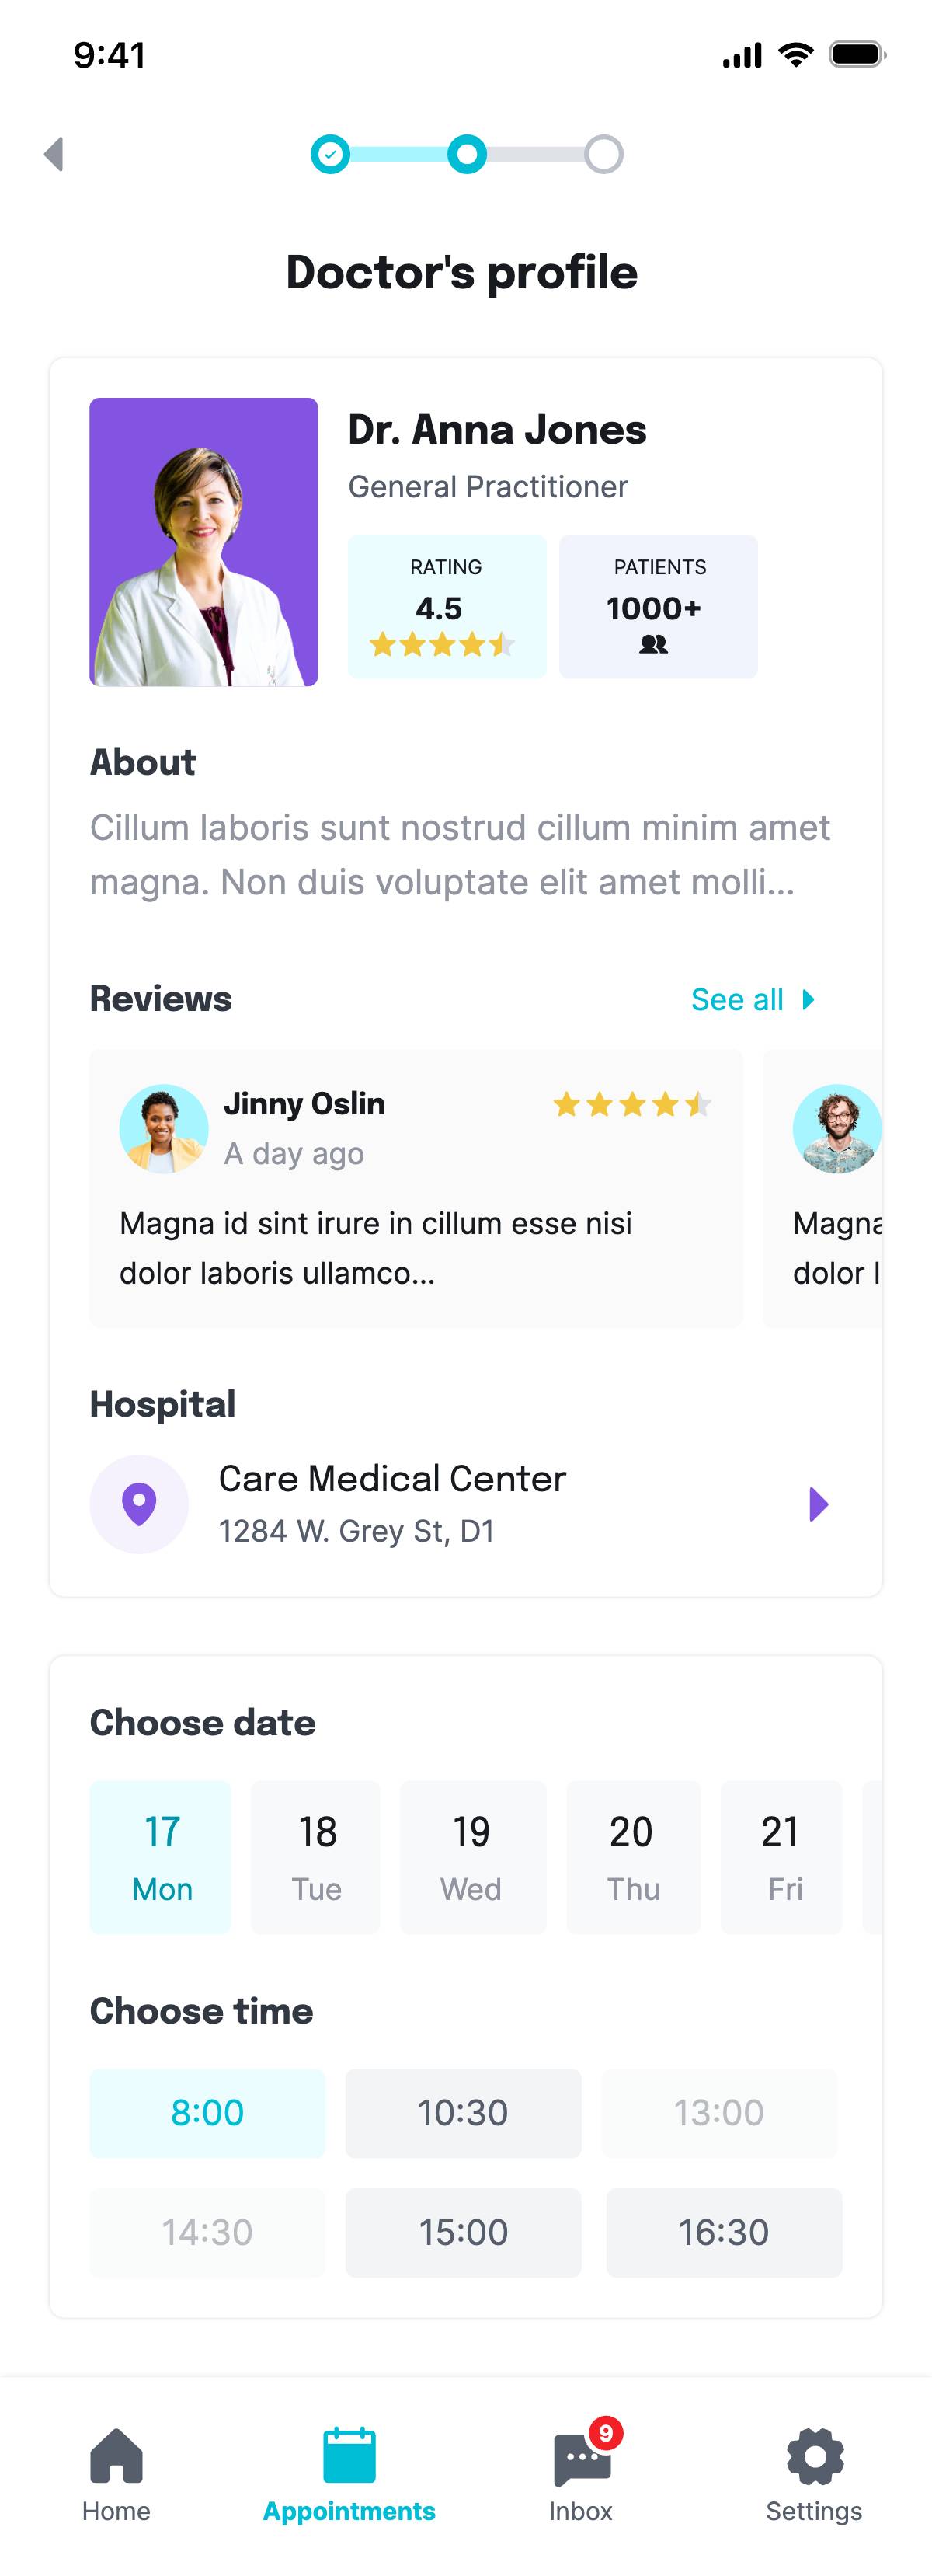 Service booking - View doctor's profile